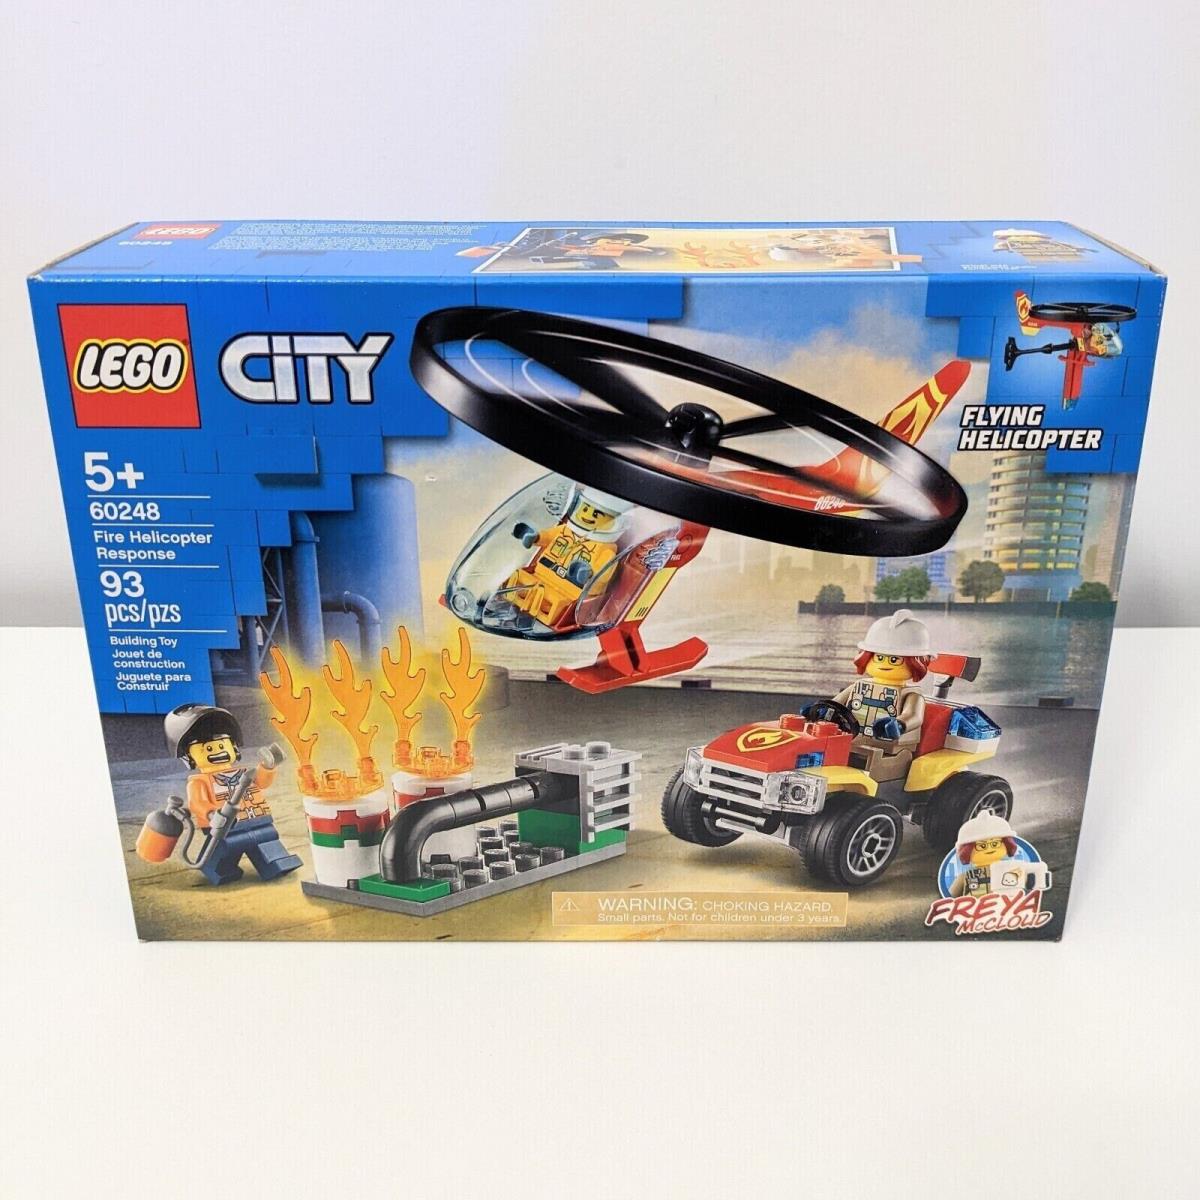 Lego City Fire Helicopter Response 60248 Building Kit Toy Retired Set